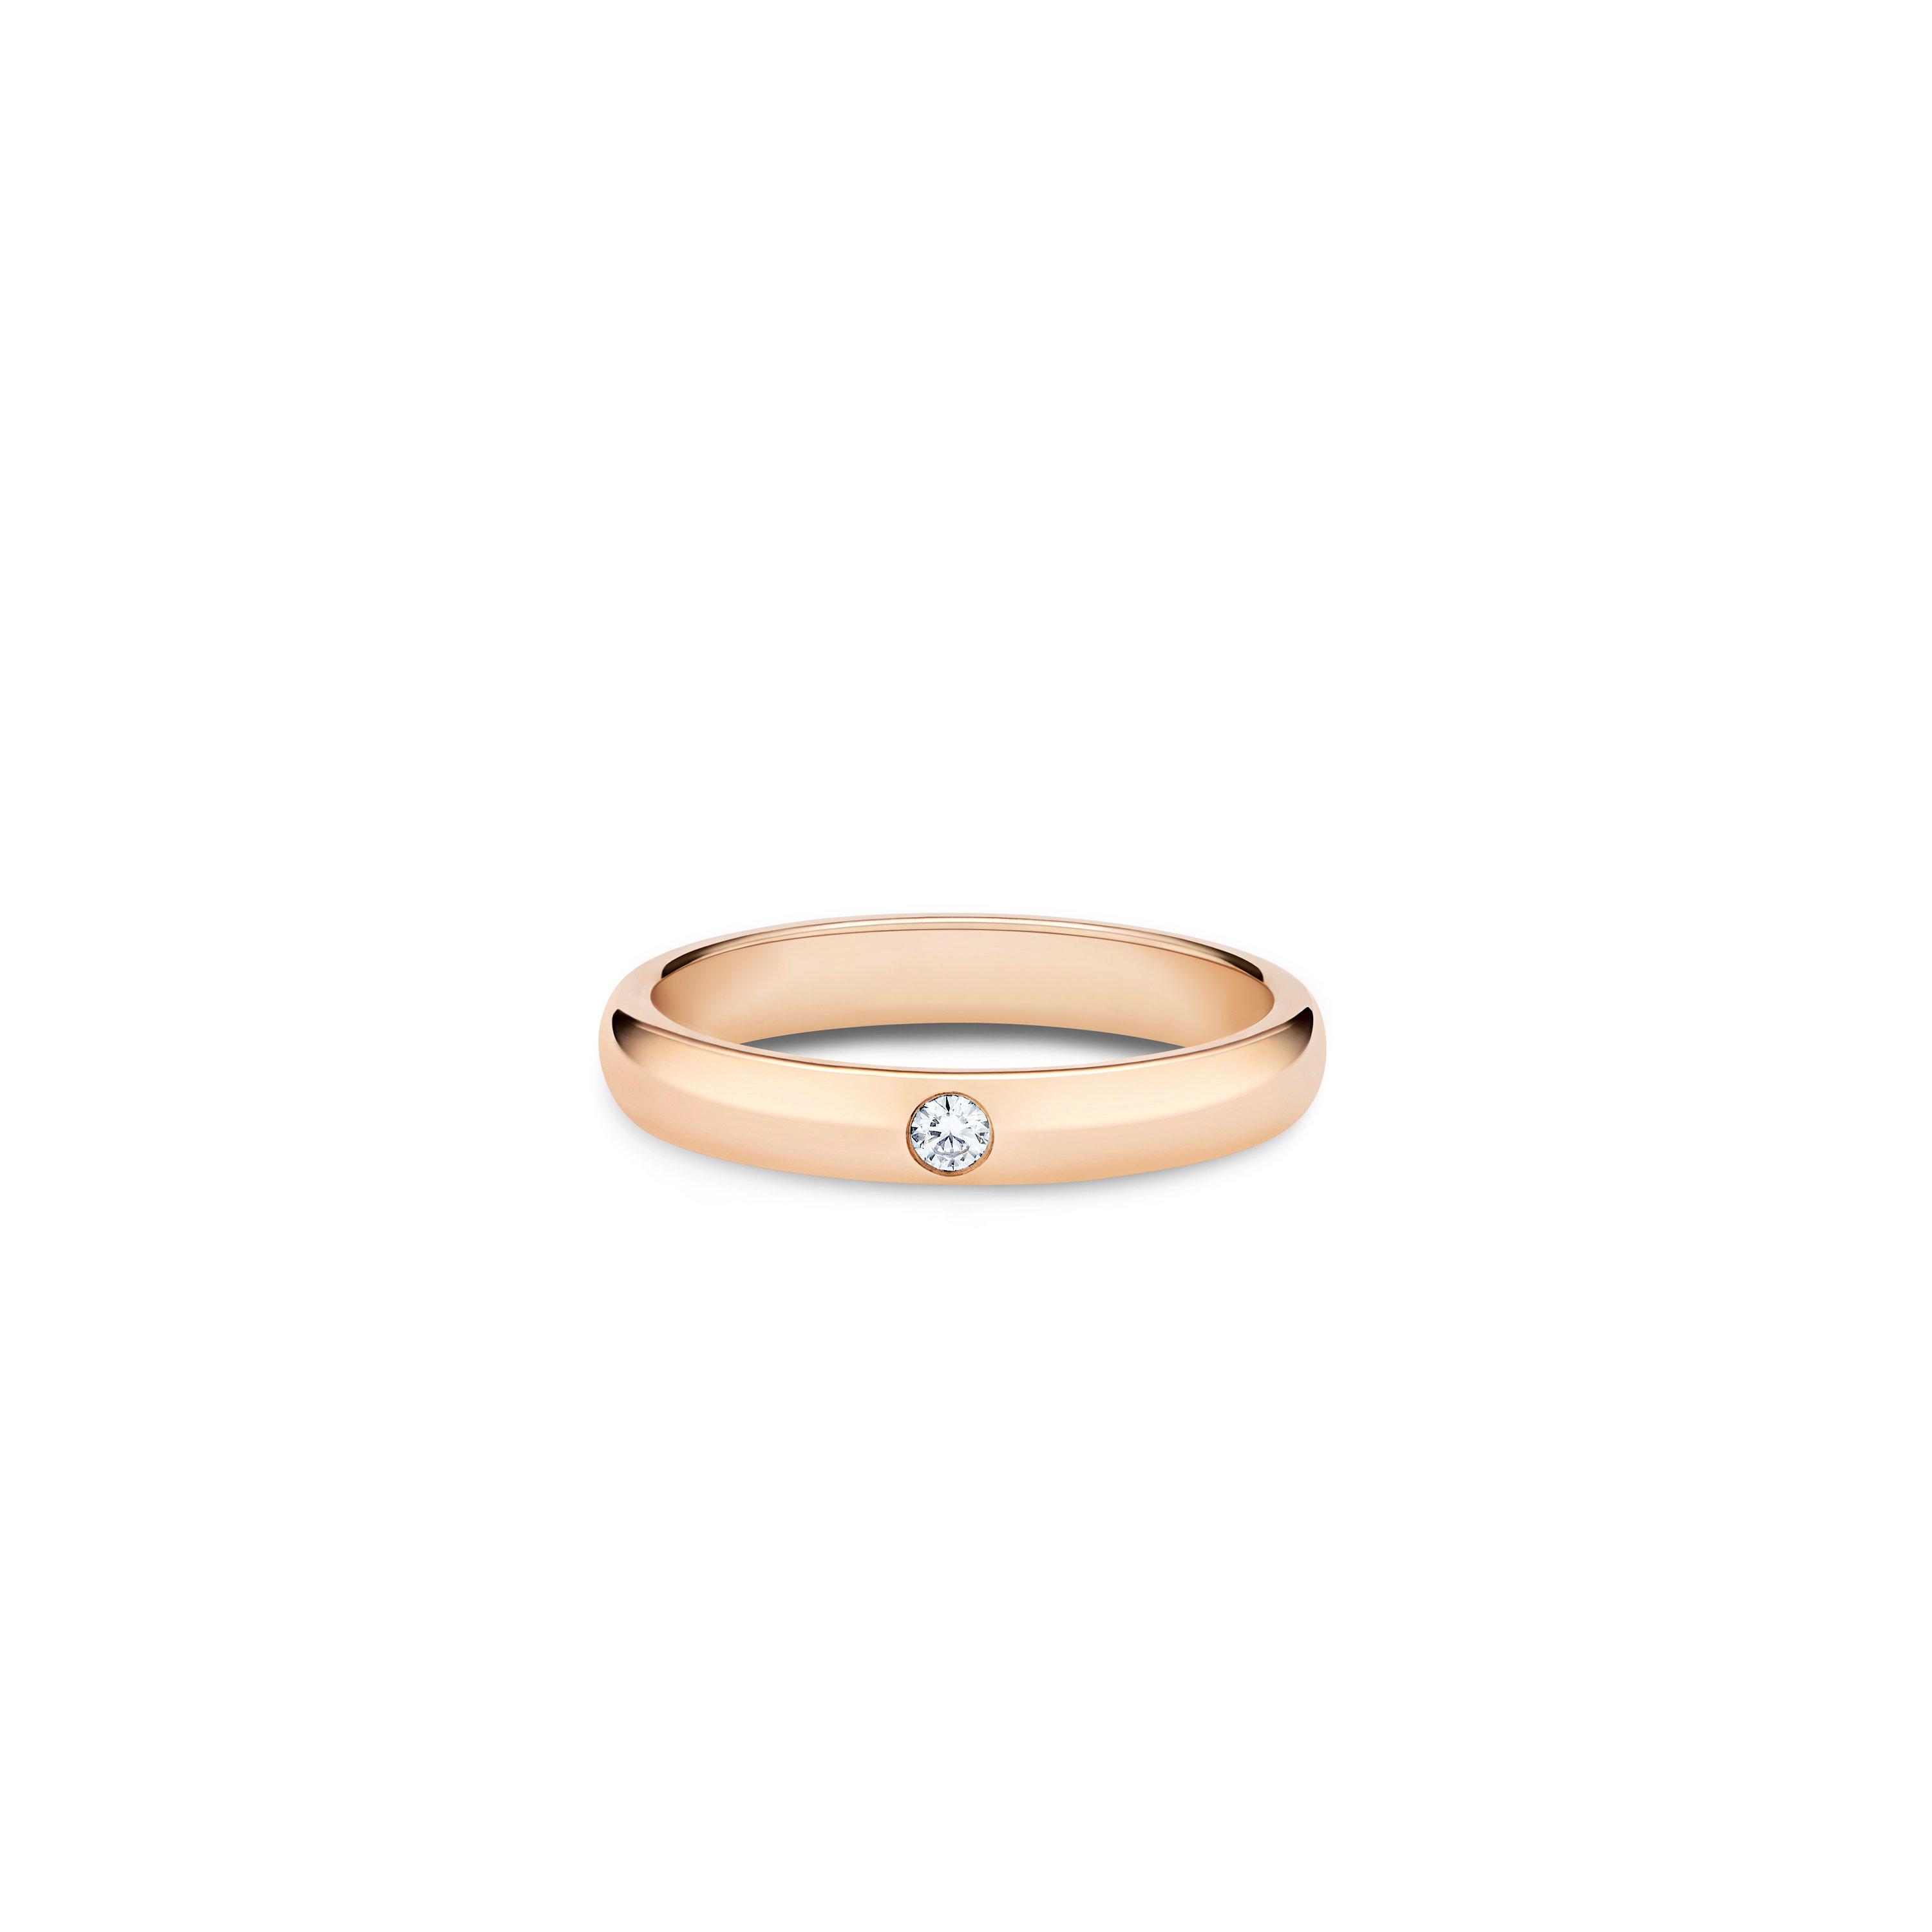 DB Classic one diamond band in rose gold, image 1